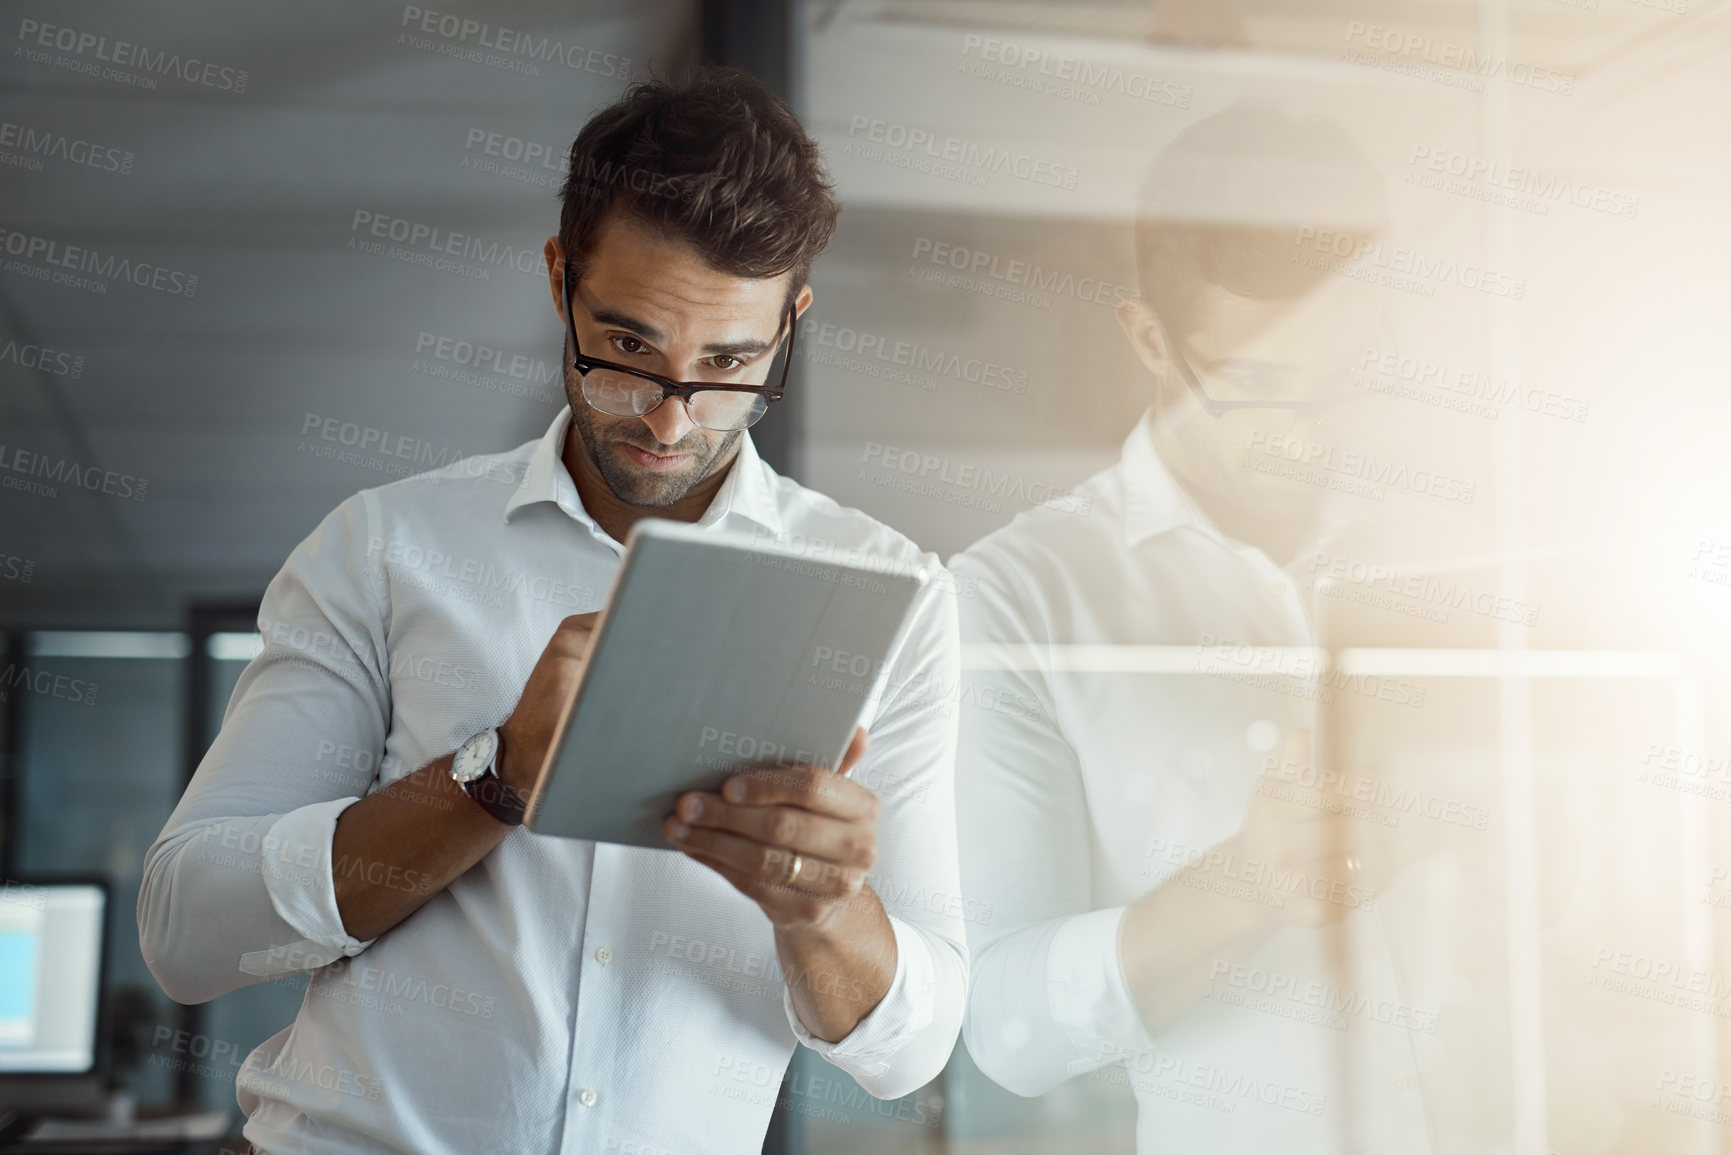 Buy stock photo Cropped shot of a handsome young businessman working on his digital tablet while standing in the office